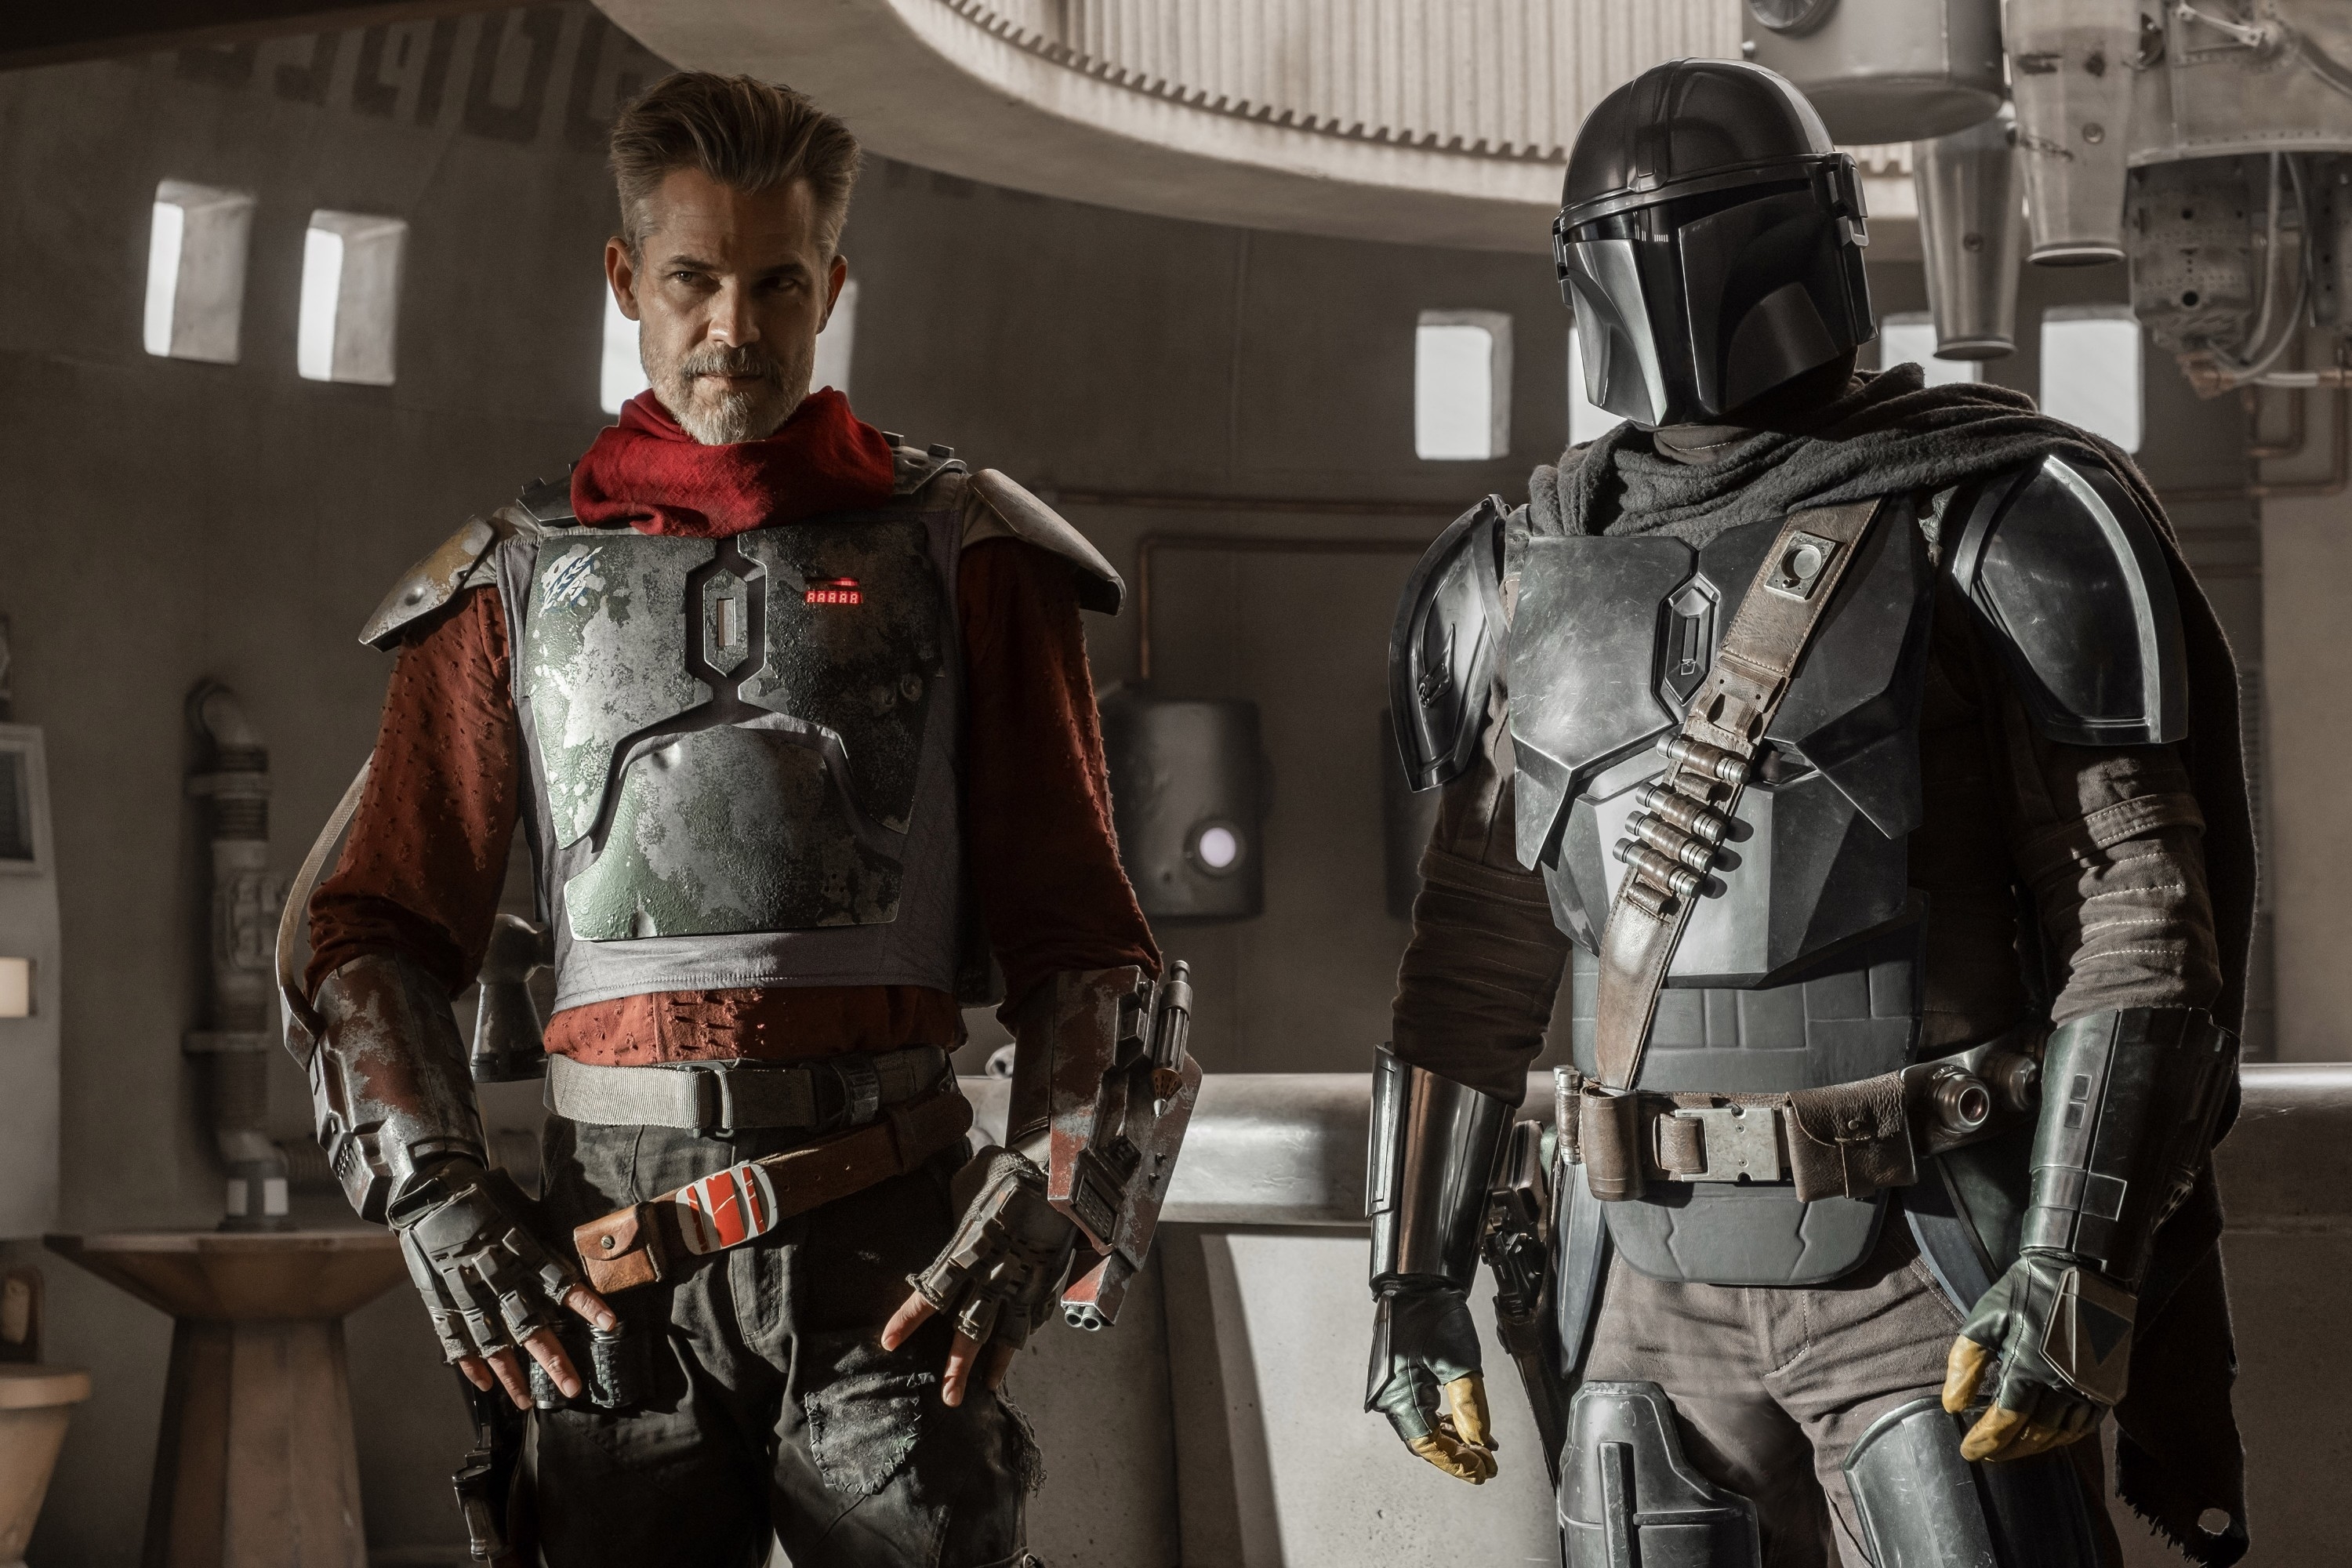 Two characters from The Mandalorian, one in a red suit with armor and the other in a silver armored suit, stand side by side